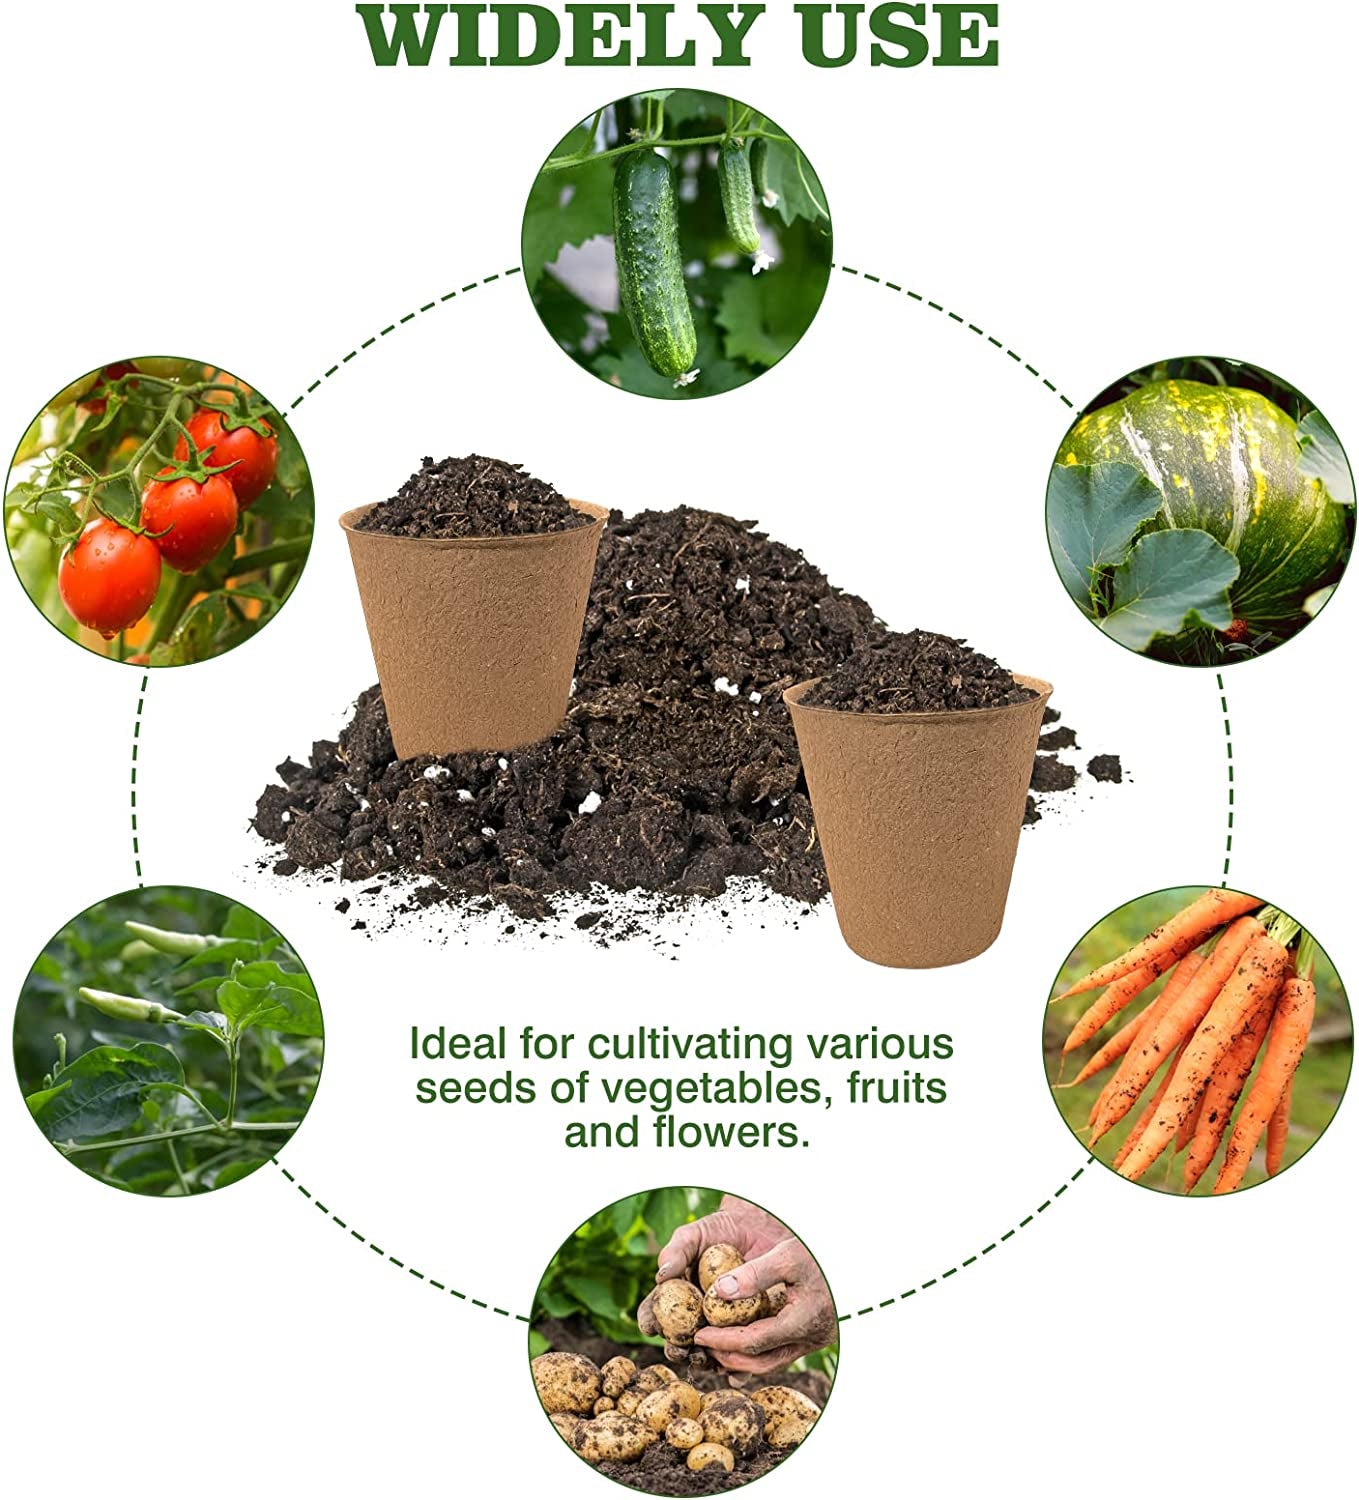 40Pcs 3.15 Inch Peat Pots, Biodegradable Eco-Friendly Round Plant Seedling Starters Kit